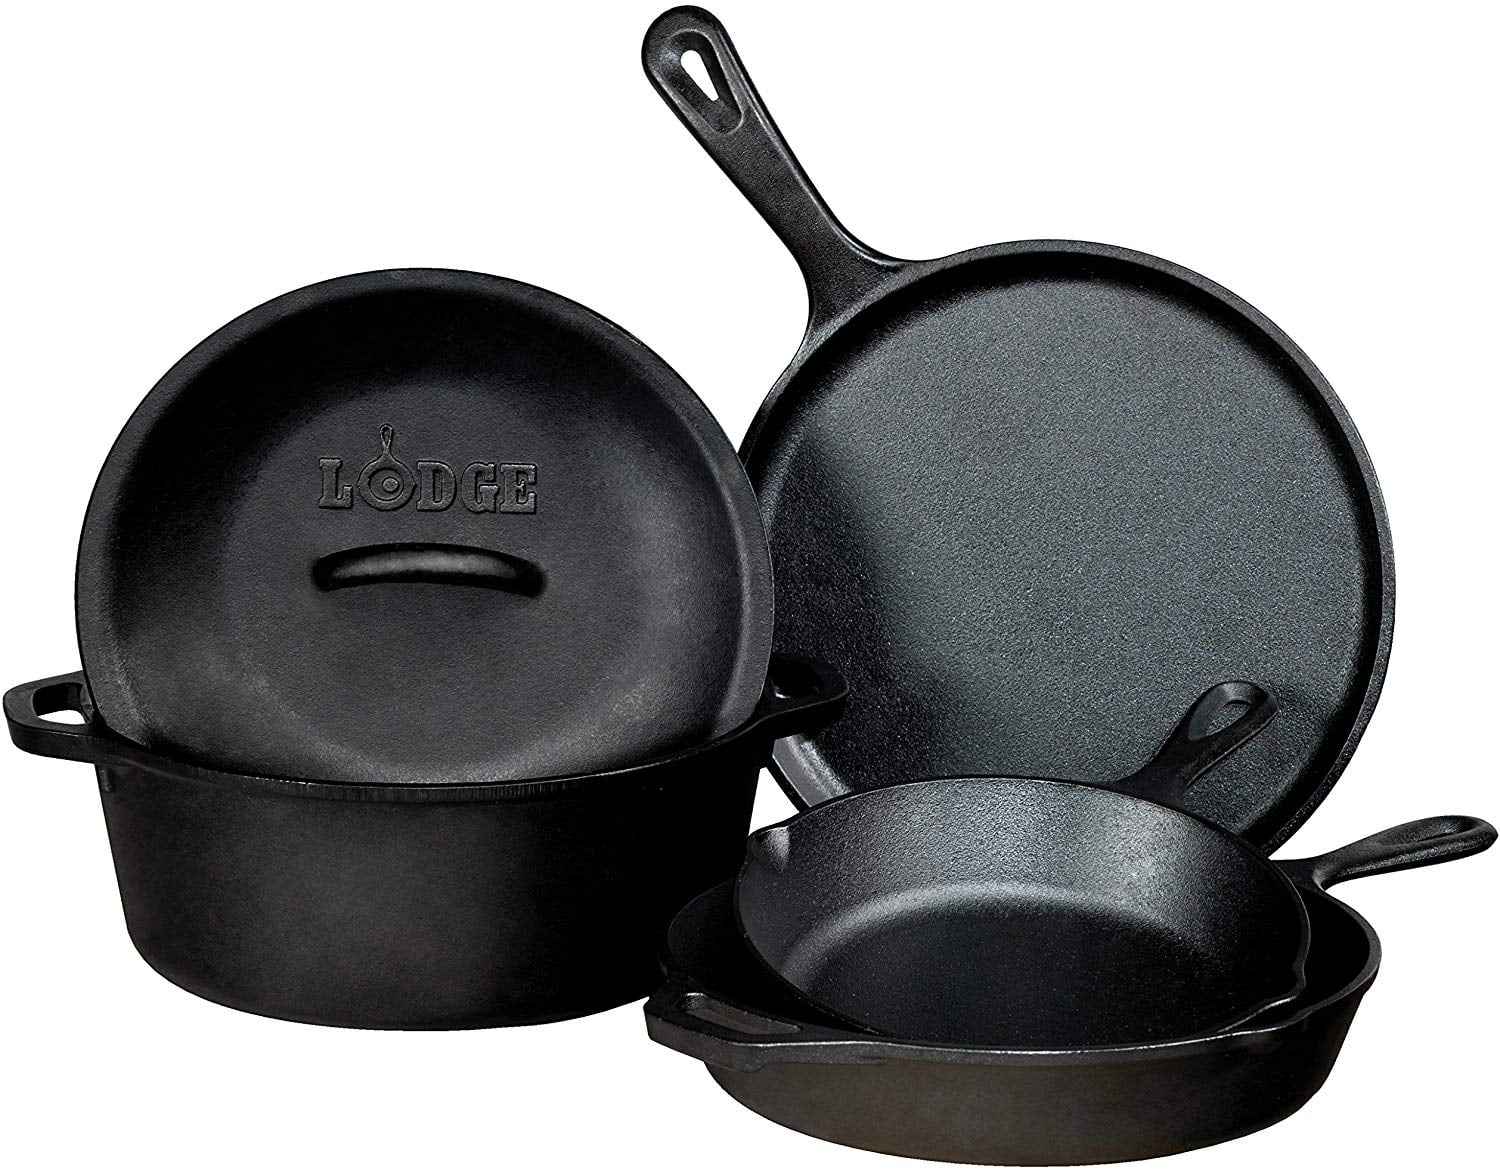 Lodge 10.25 in. Cast Iron Baker's Skillet BW10BSK - The Home Depot